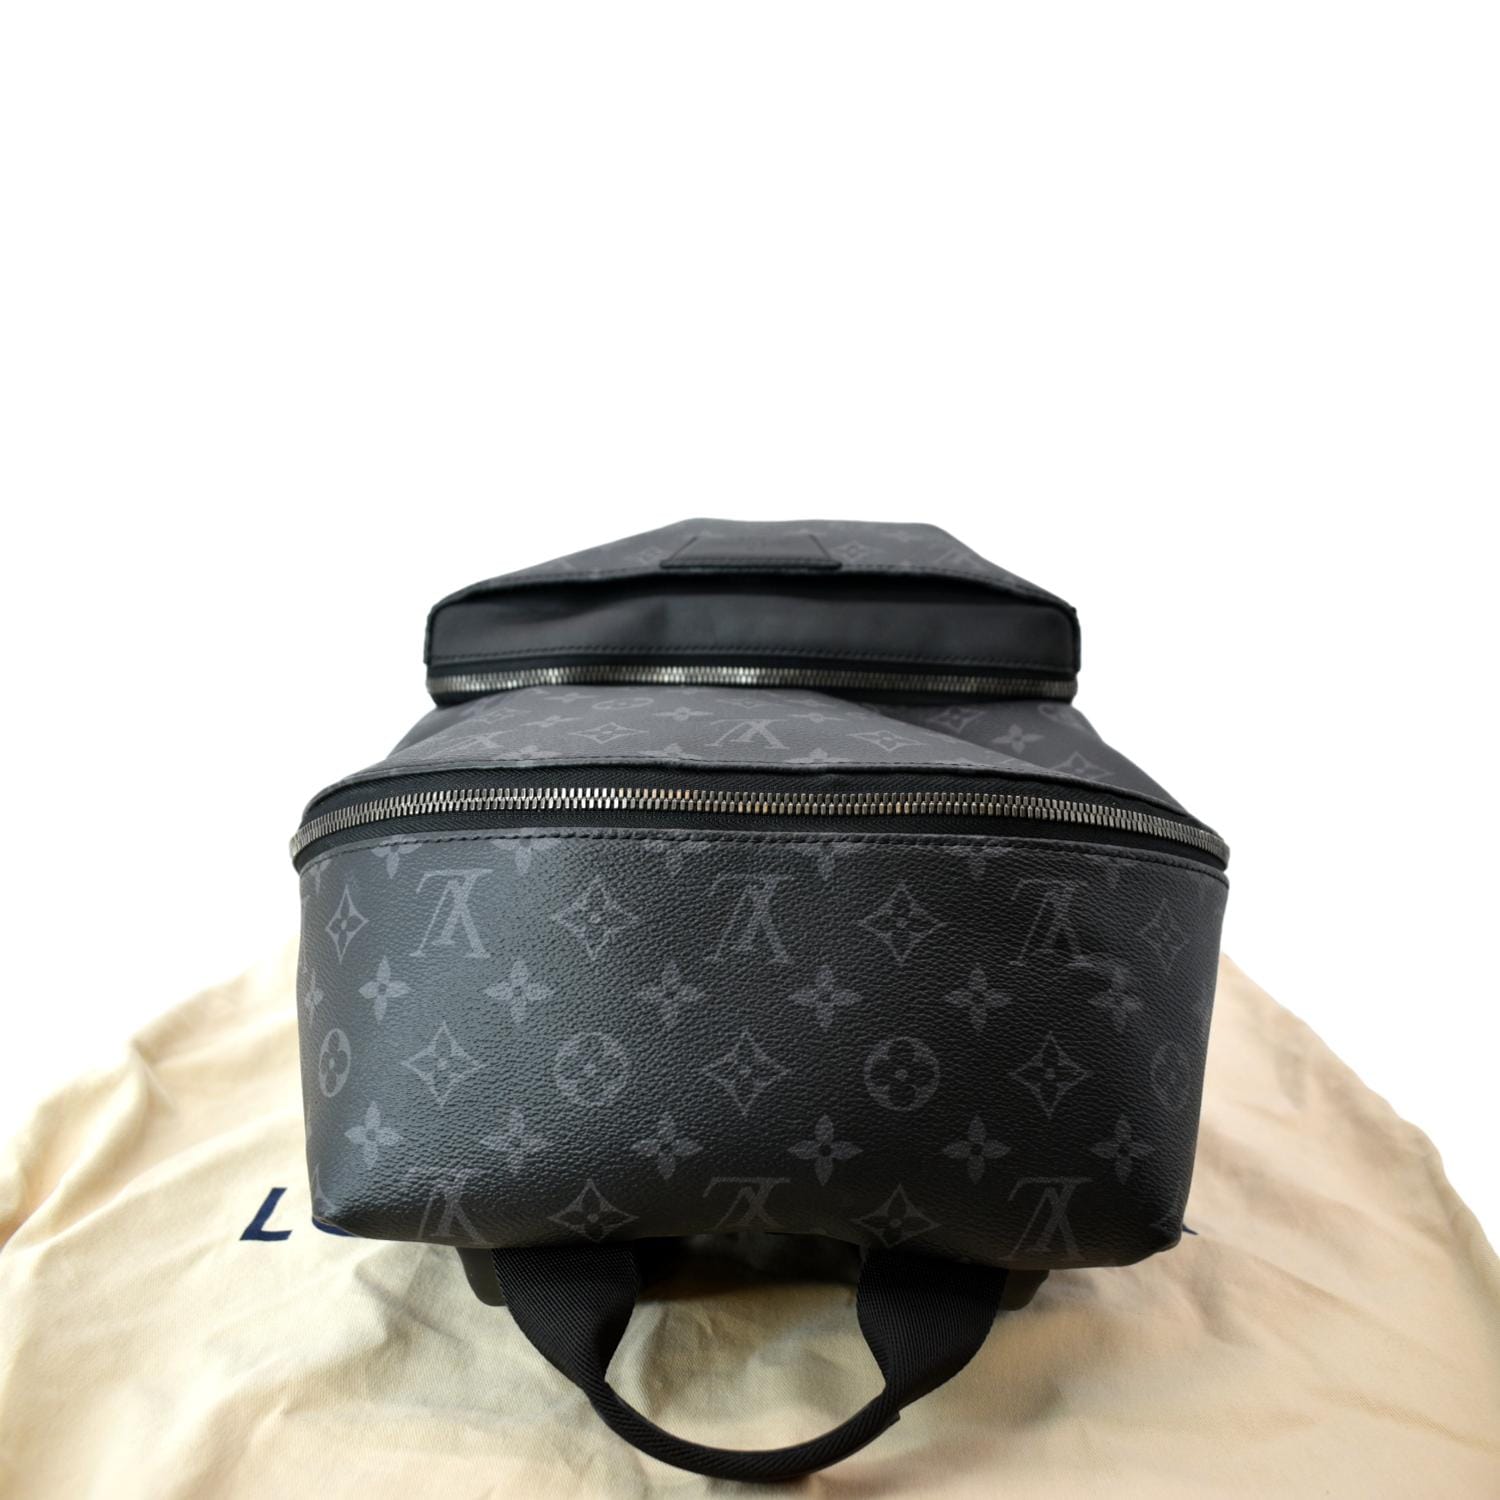 LOUIS VUITTON DISCOVERY MONOGRAM ECLIPSE BACKPACK - Garde Robe